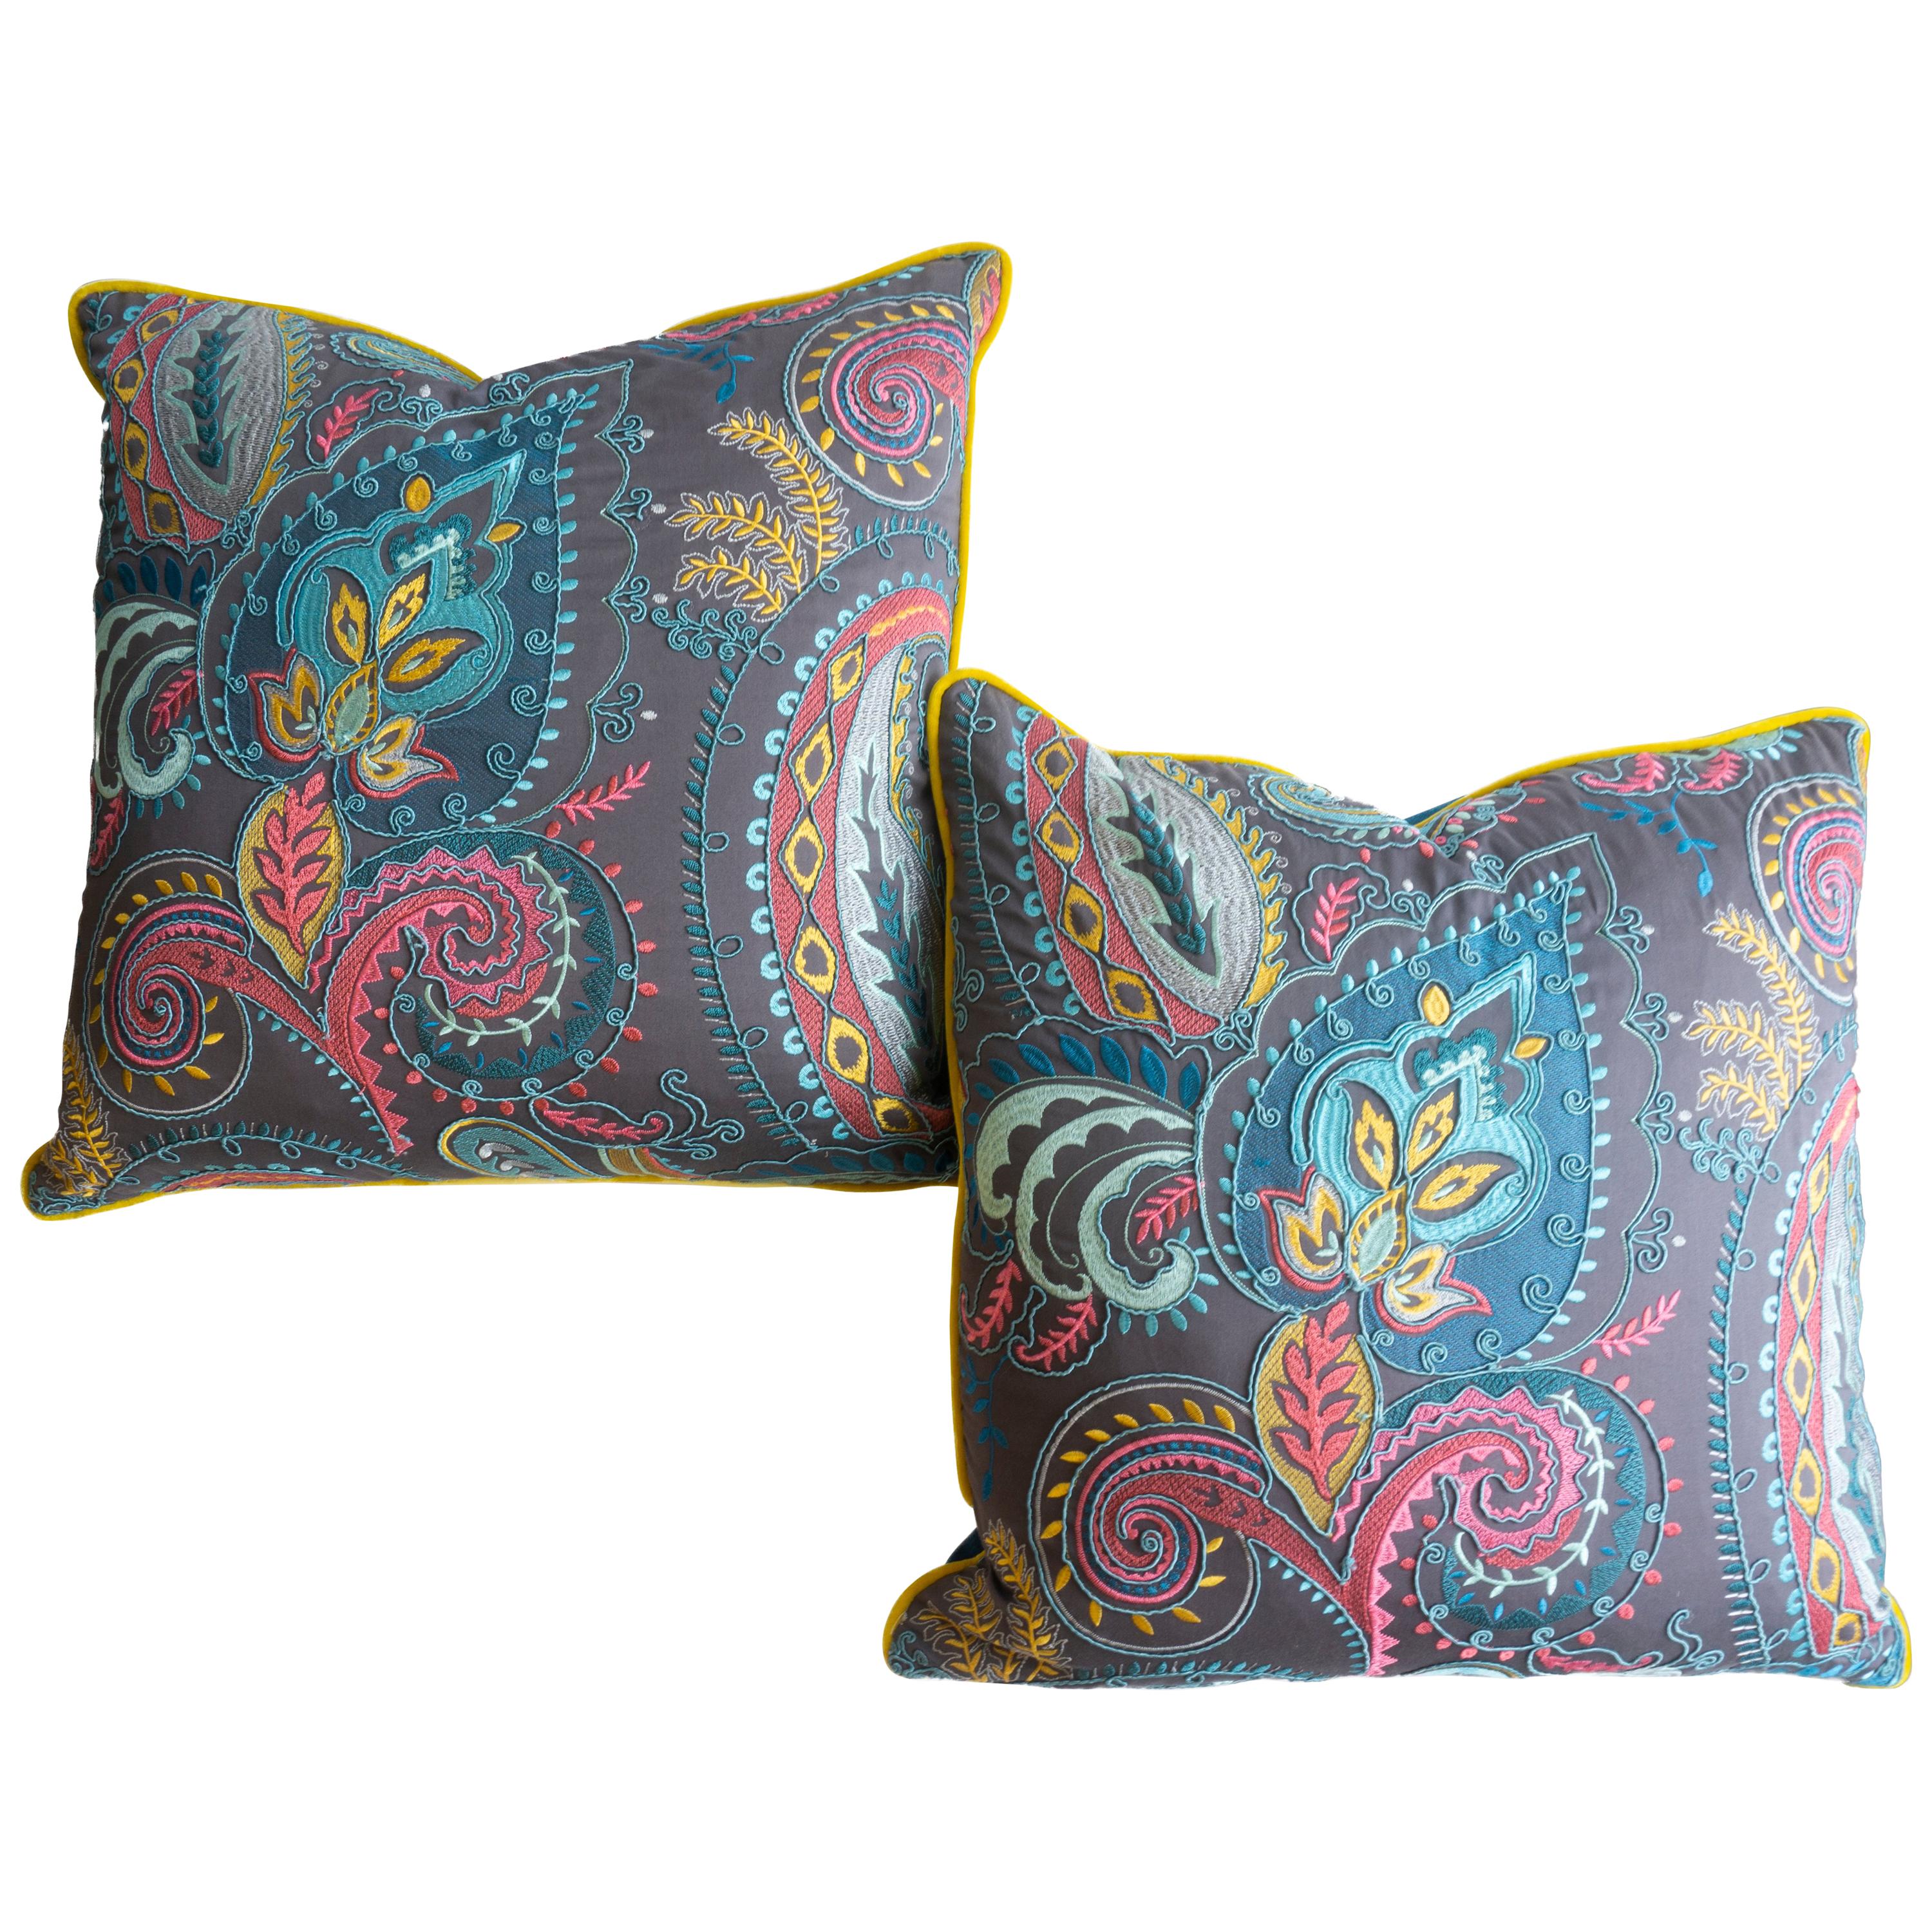 Colorful Embroidered Throw Pillows in Paisley Pattern